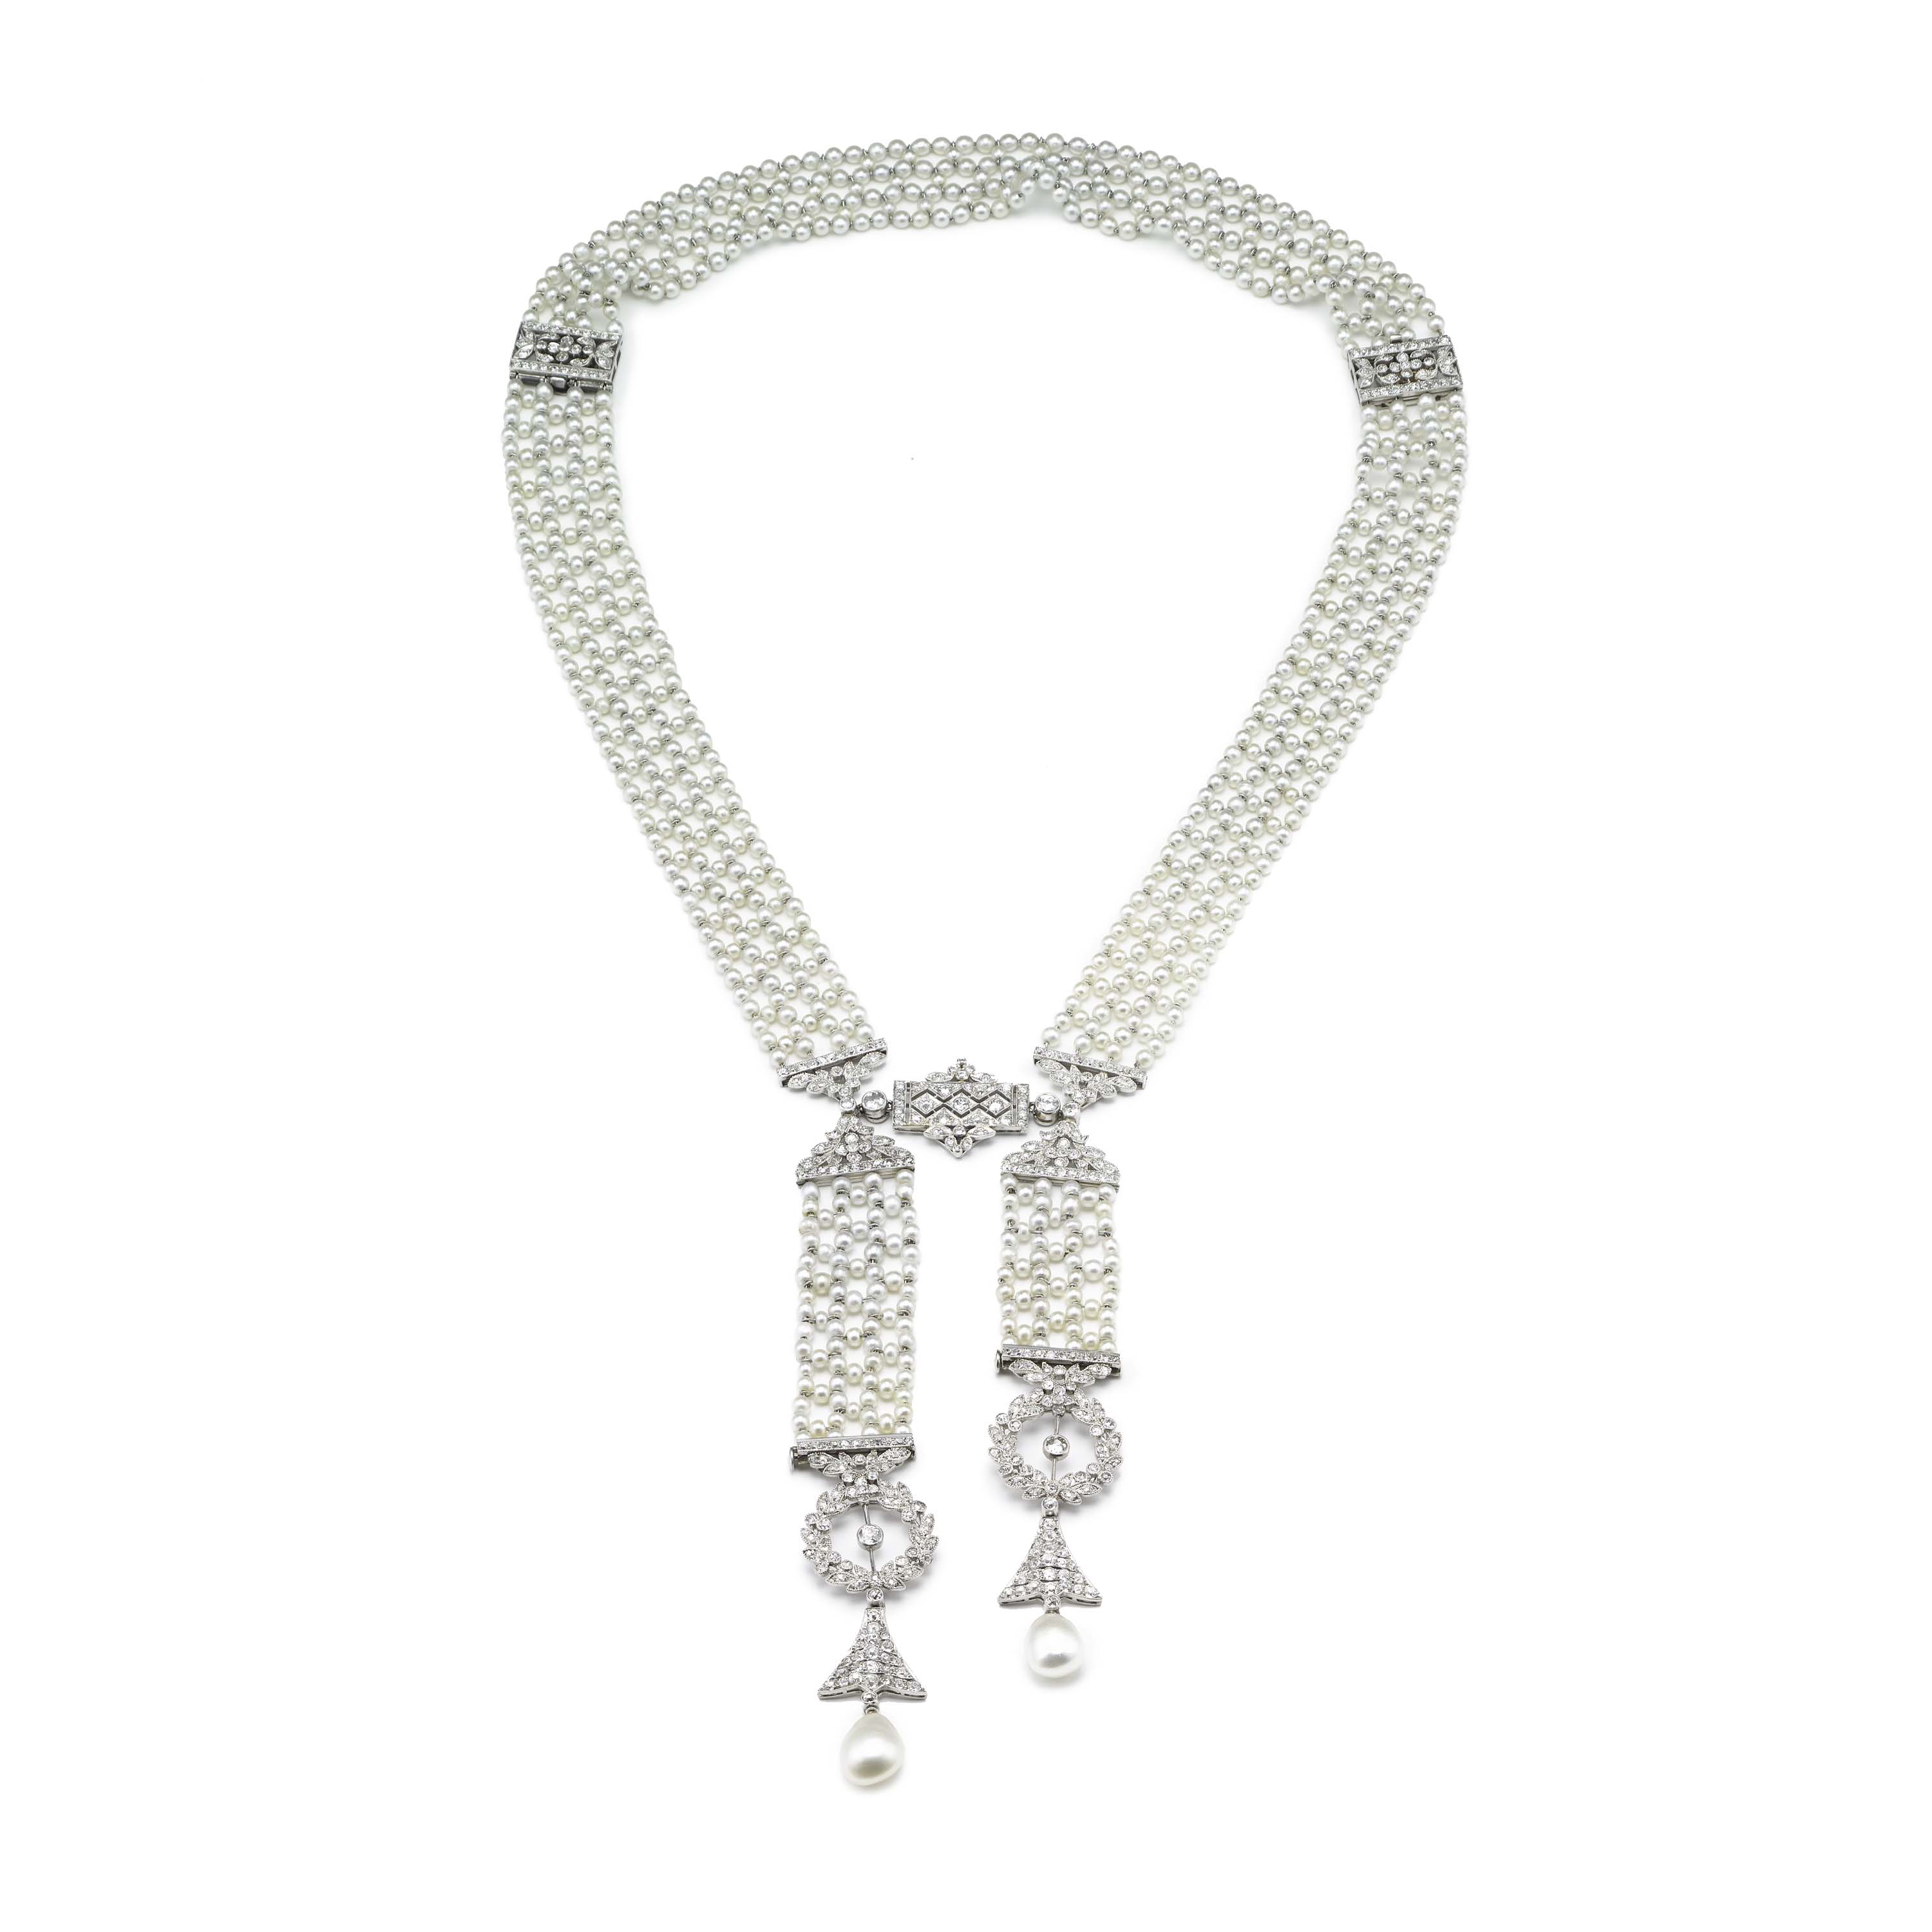 Tiffany Sautoir with pearls and diamonds in platinum